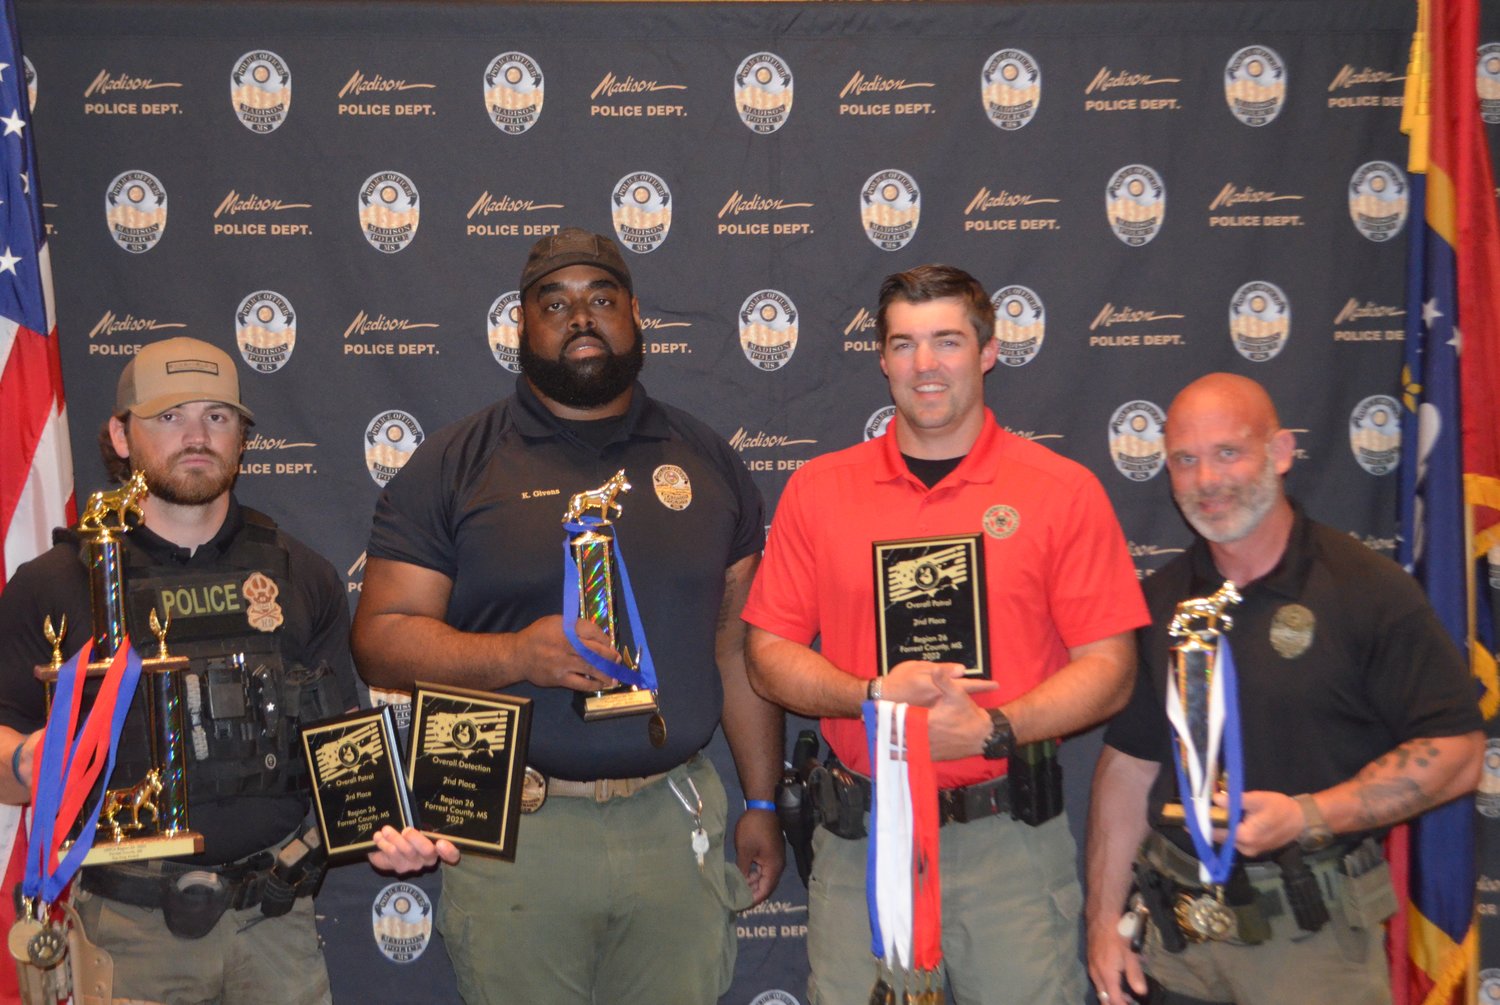 Officers from the Madison Police Department and Madison County Sheriff’s Office show off their awards from the Region 26 United States Police Canine Association Regional Trials and Certification. Pictured, from left: Investigators Lee Sanders and Karlin Givens, Deputy Conner Smith of the Madison County Sheriff’s Office, and Investigator Ricky Cross.